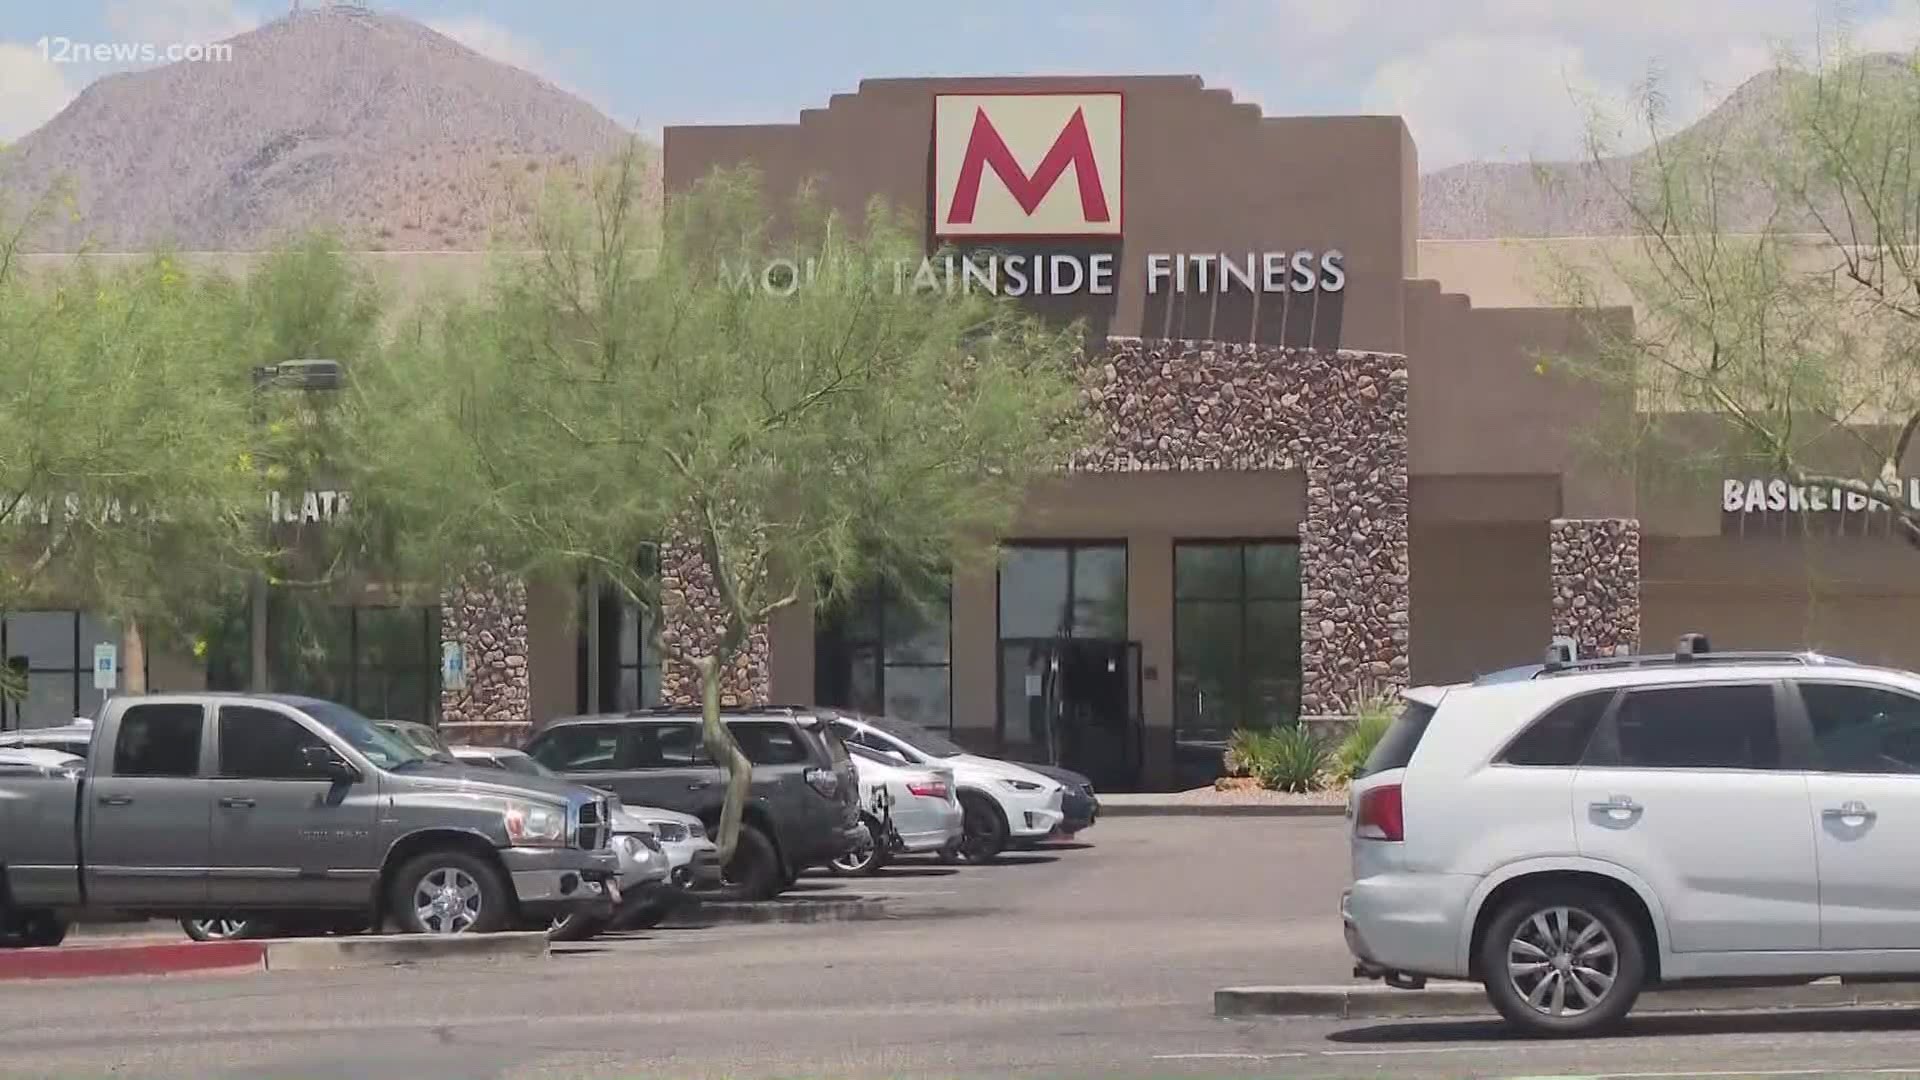 Judge says Ducey not in contempt of court versus Mountainside Fitness